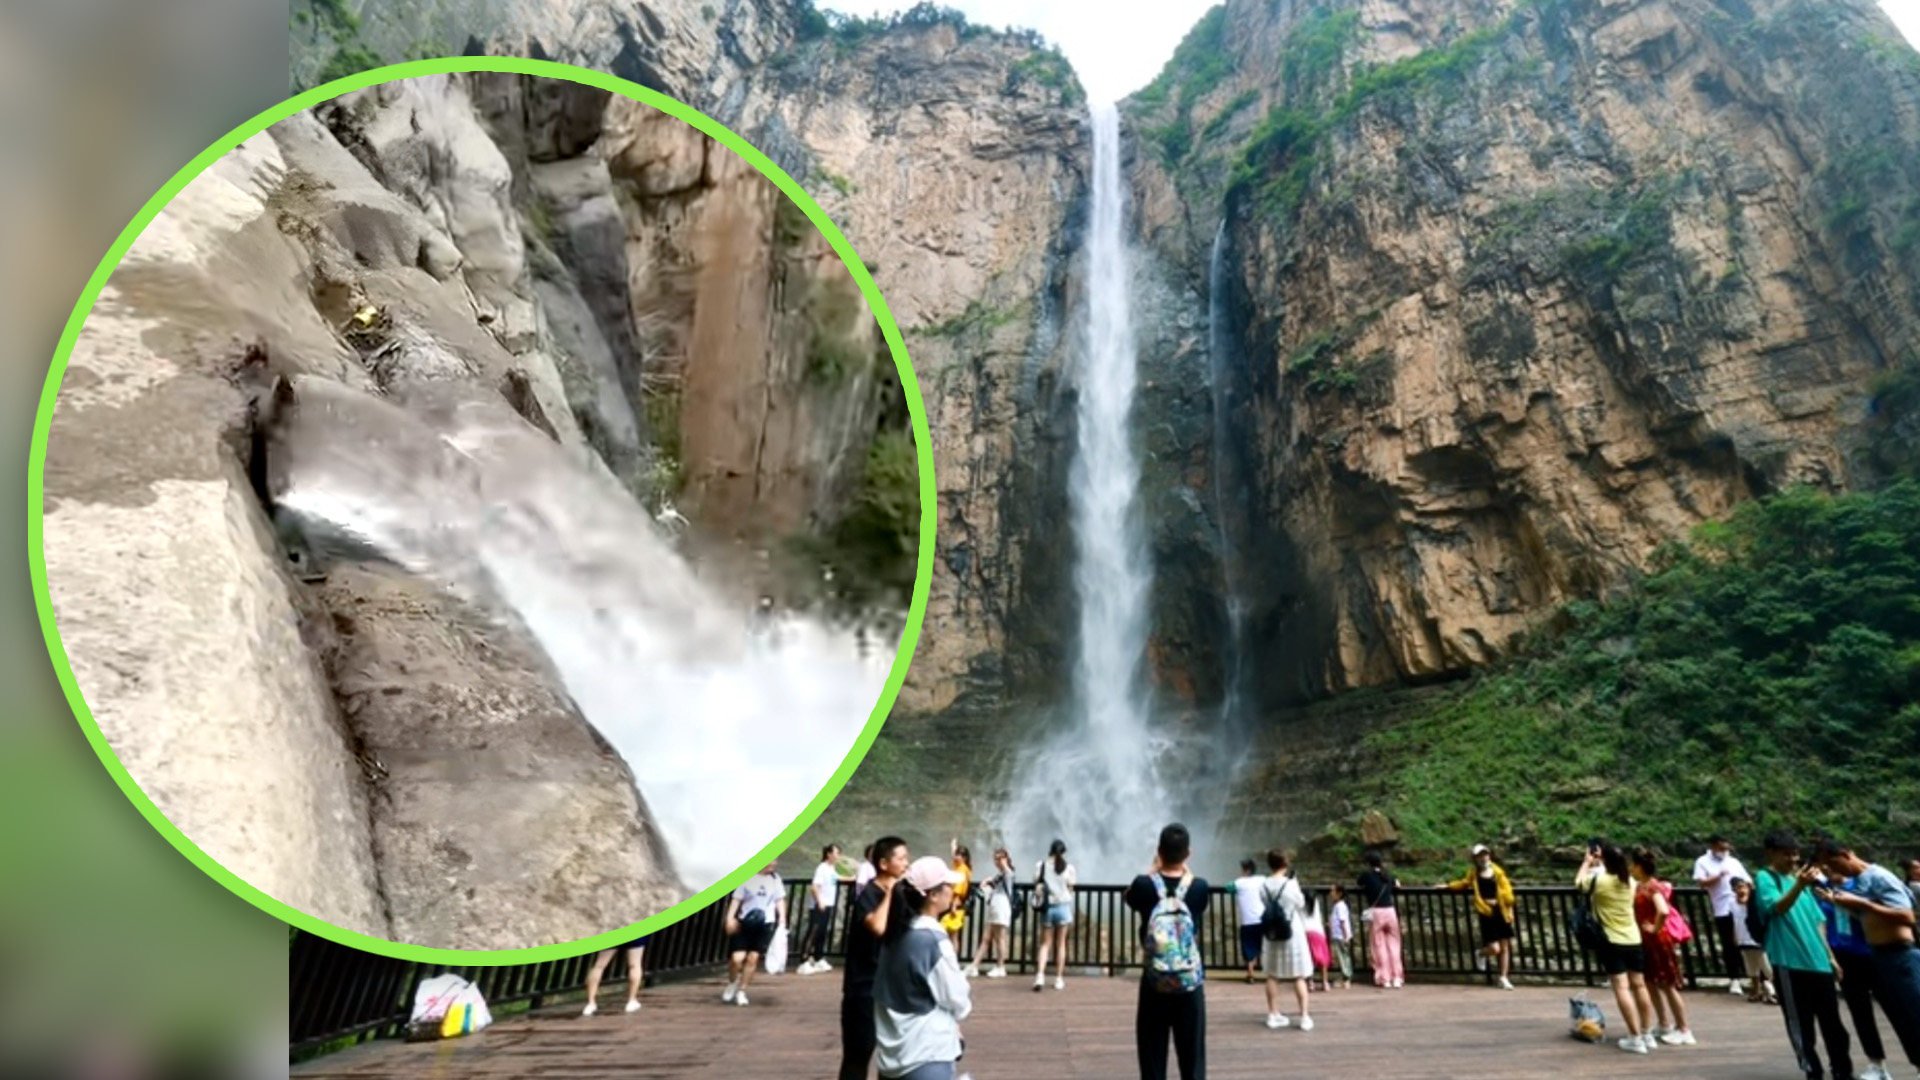 A video has exposed China’s “natural” wonder, the Yuntai Mountain Waterfall, as partially man-made. Photo: SCMP composite/Weibo/Douyin
